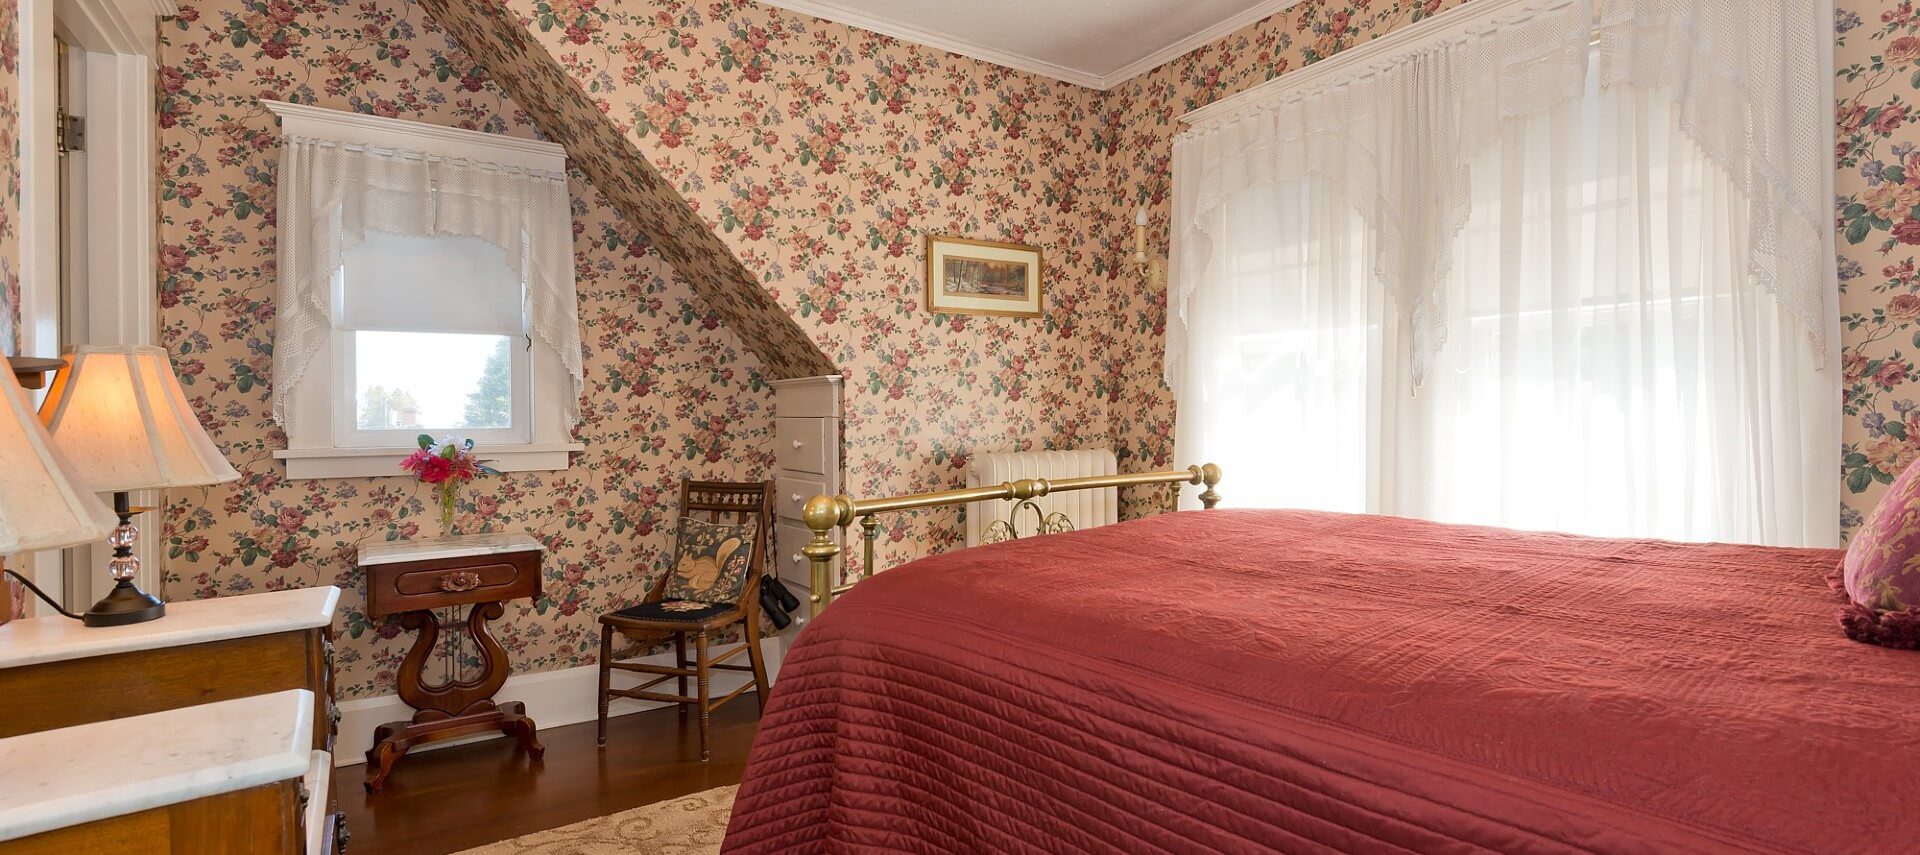 Queen bed with red quilt and brass frame in bedroom with flowered wallpaper and bright windows